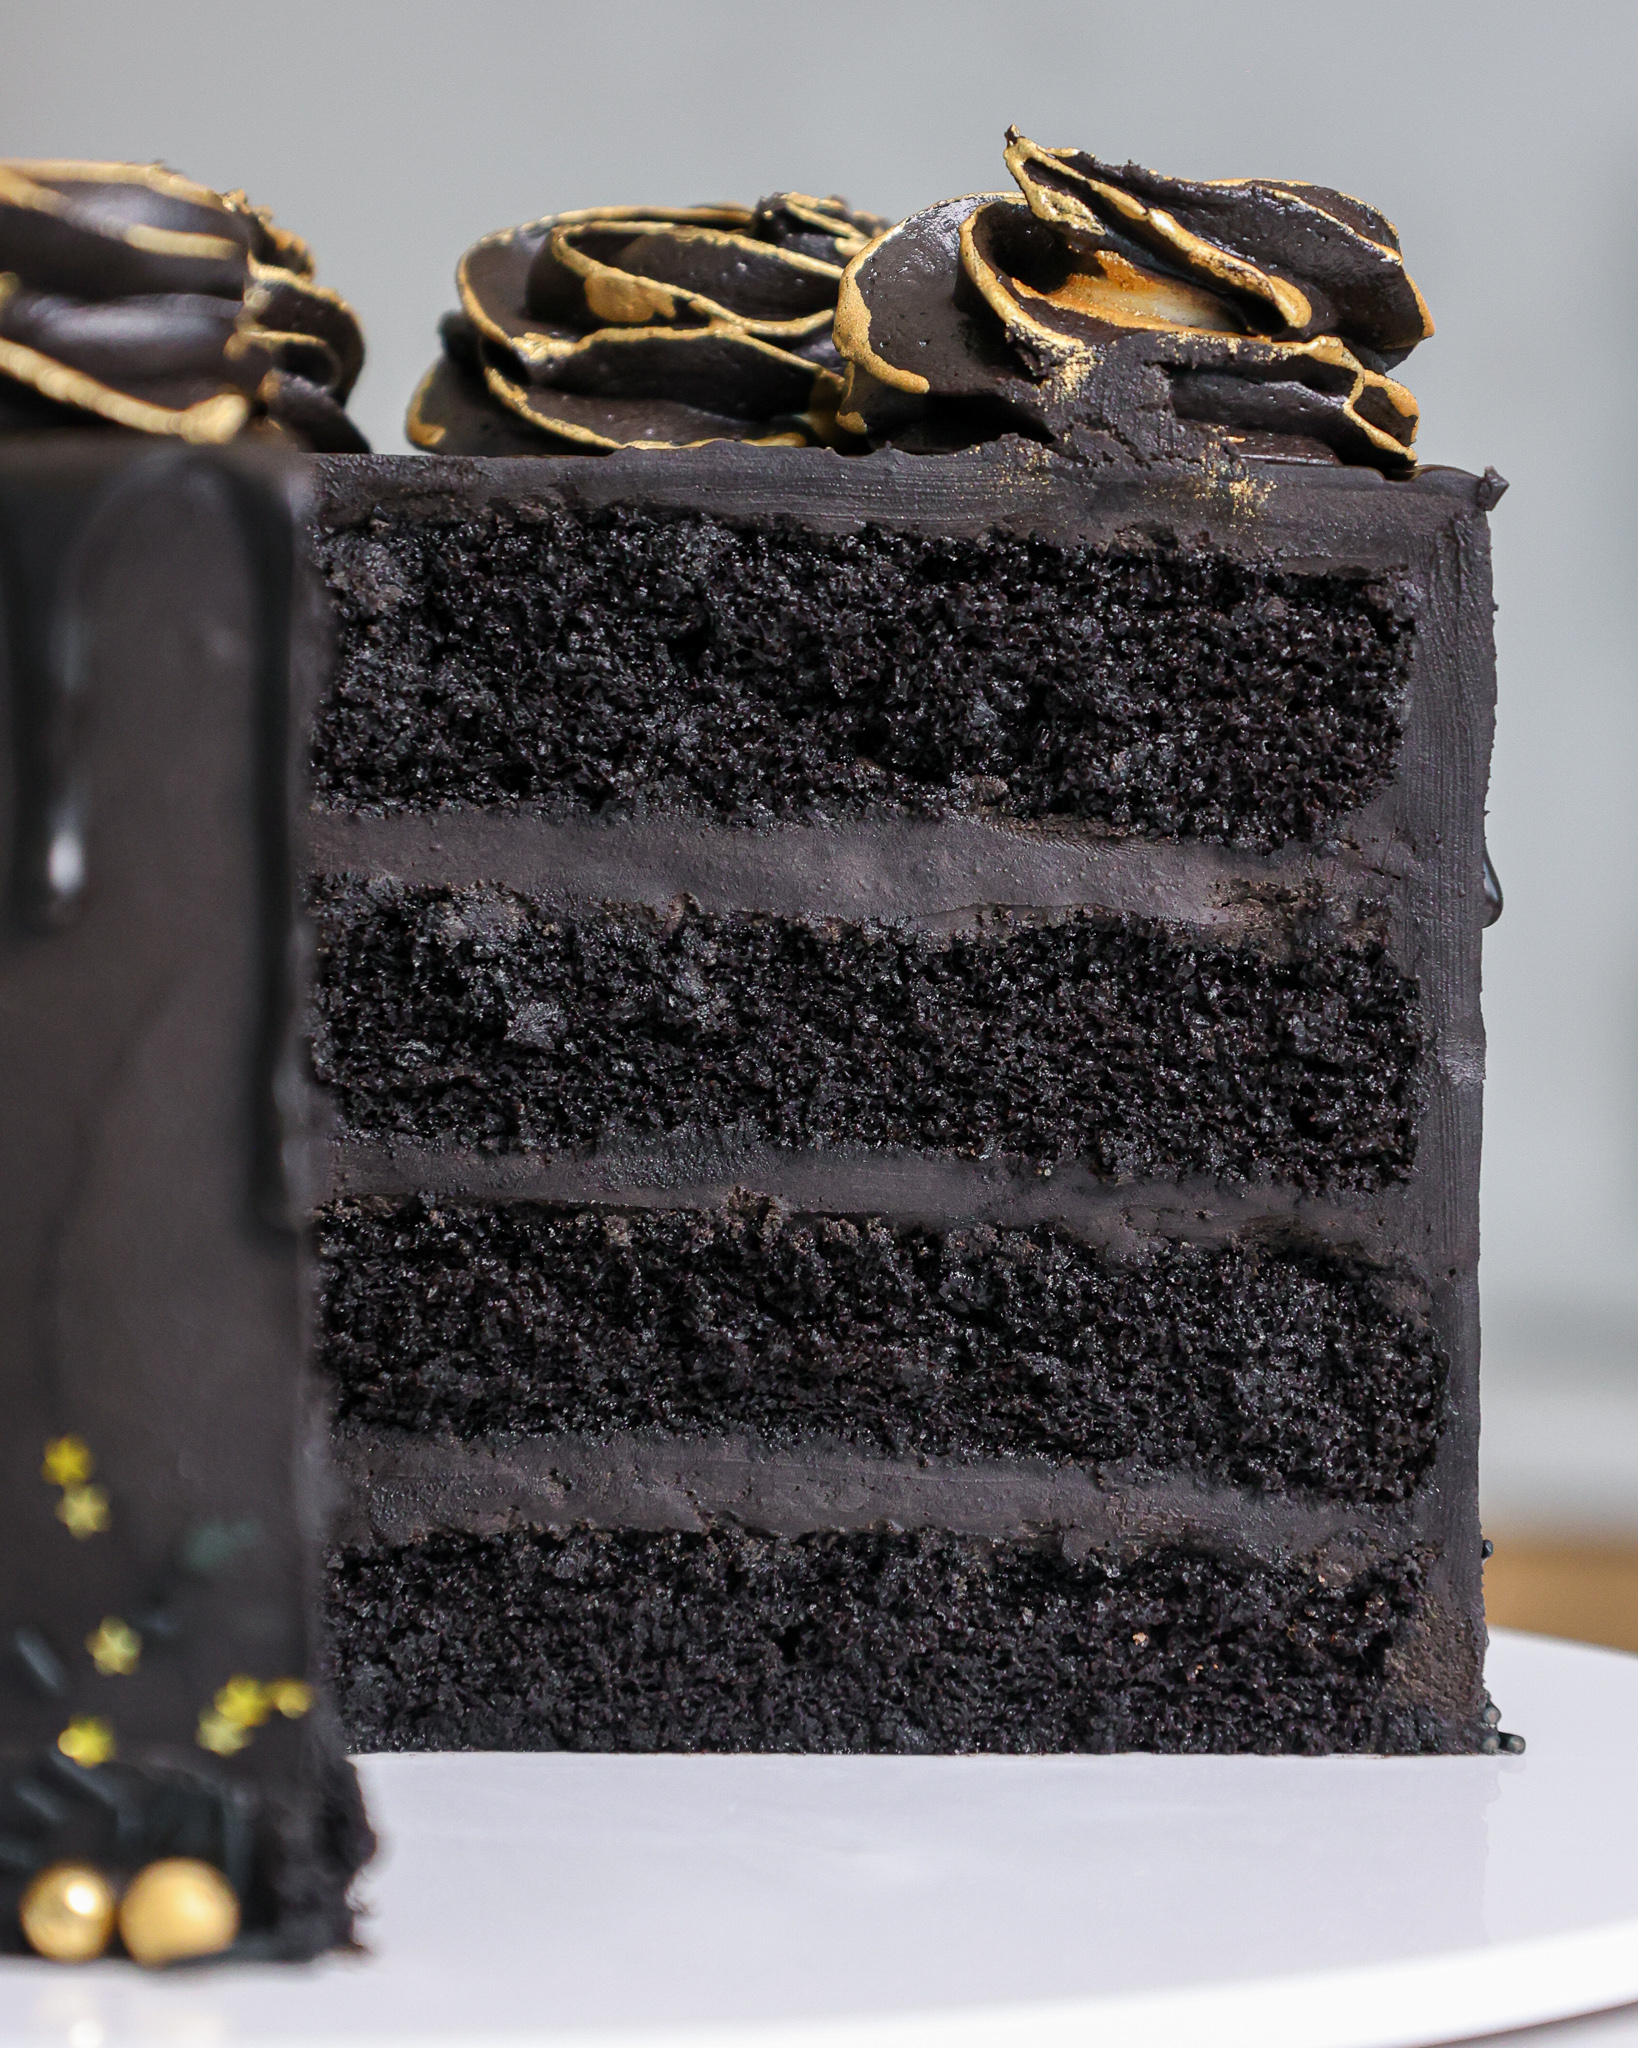 image of a black velvet layer cake that's been frosted with a delicious black dark chocolate buttercream